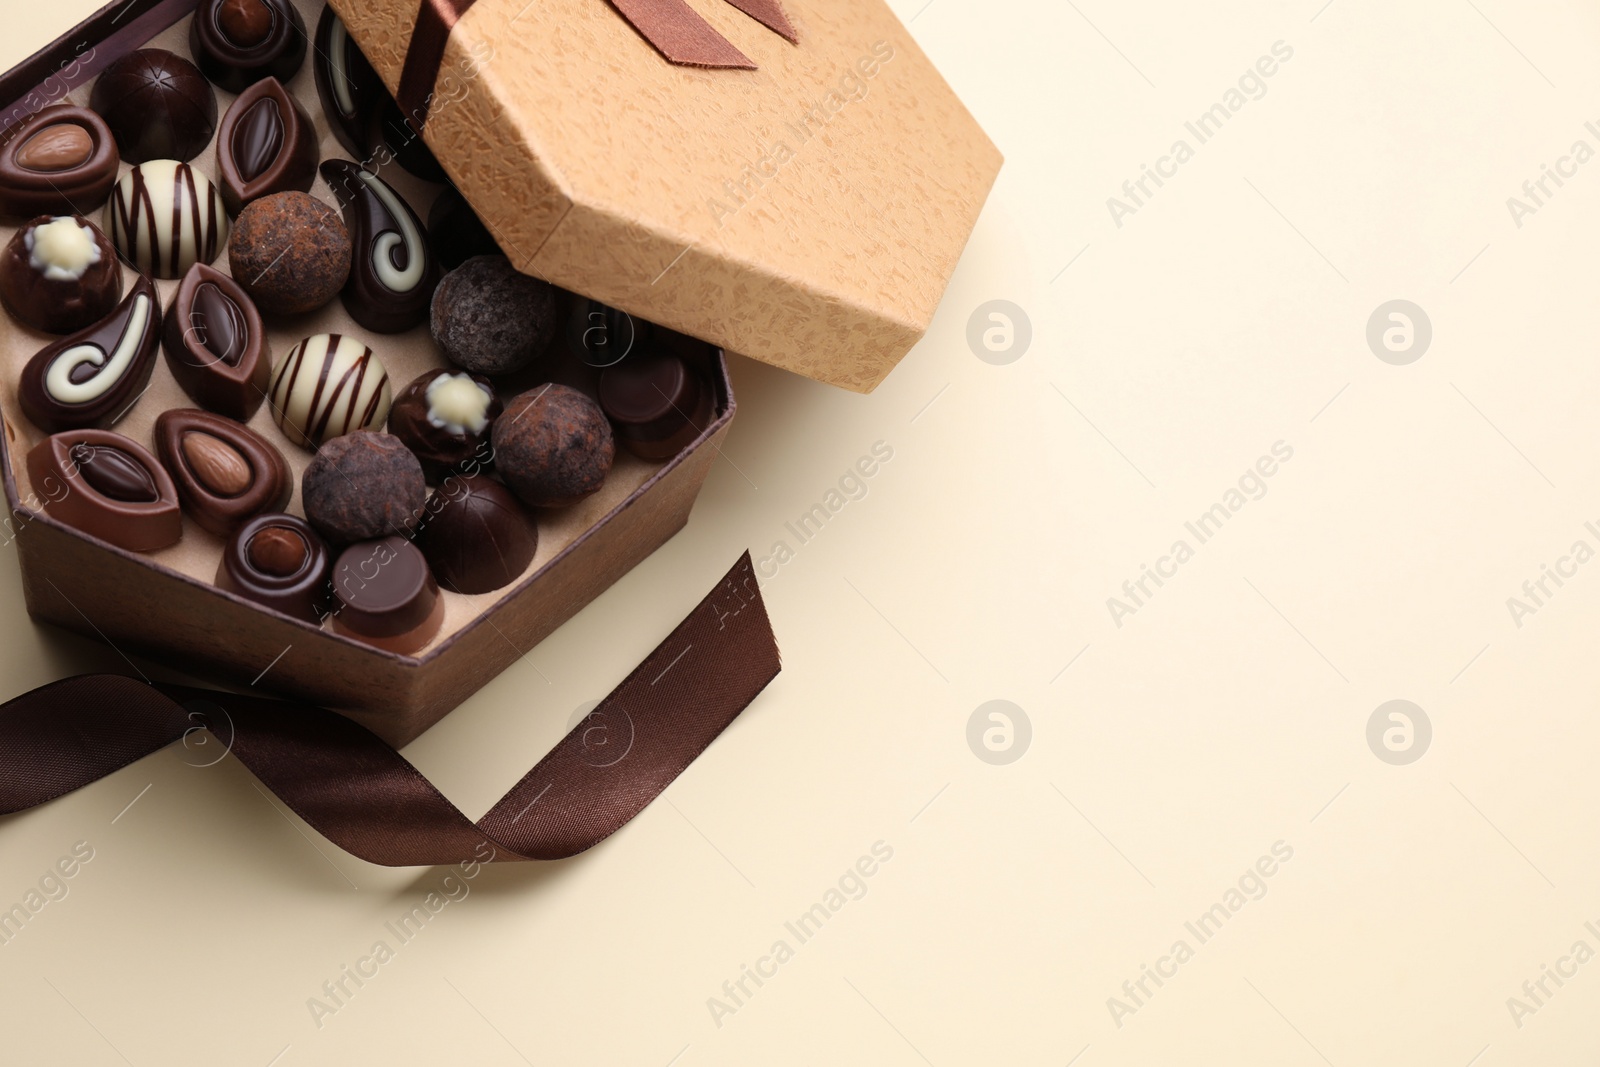 Photo of Open box of delicious chocolate candies and brown ribbon on beige background, flat lay. Space for text